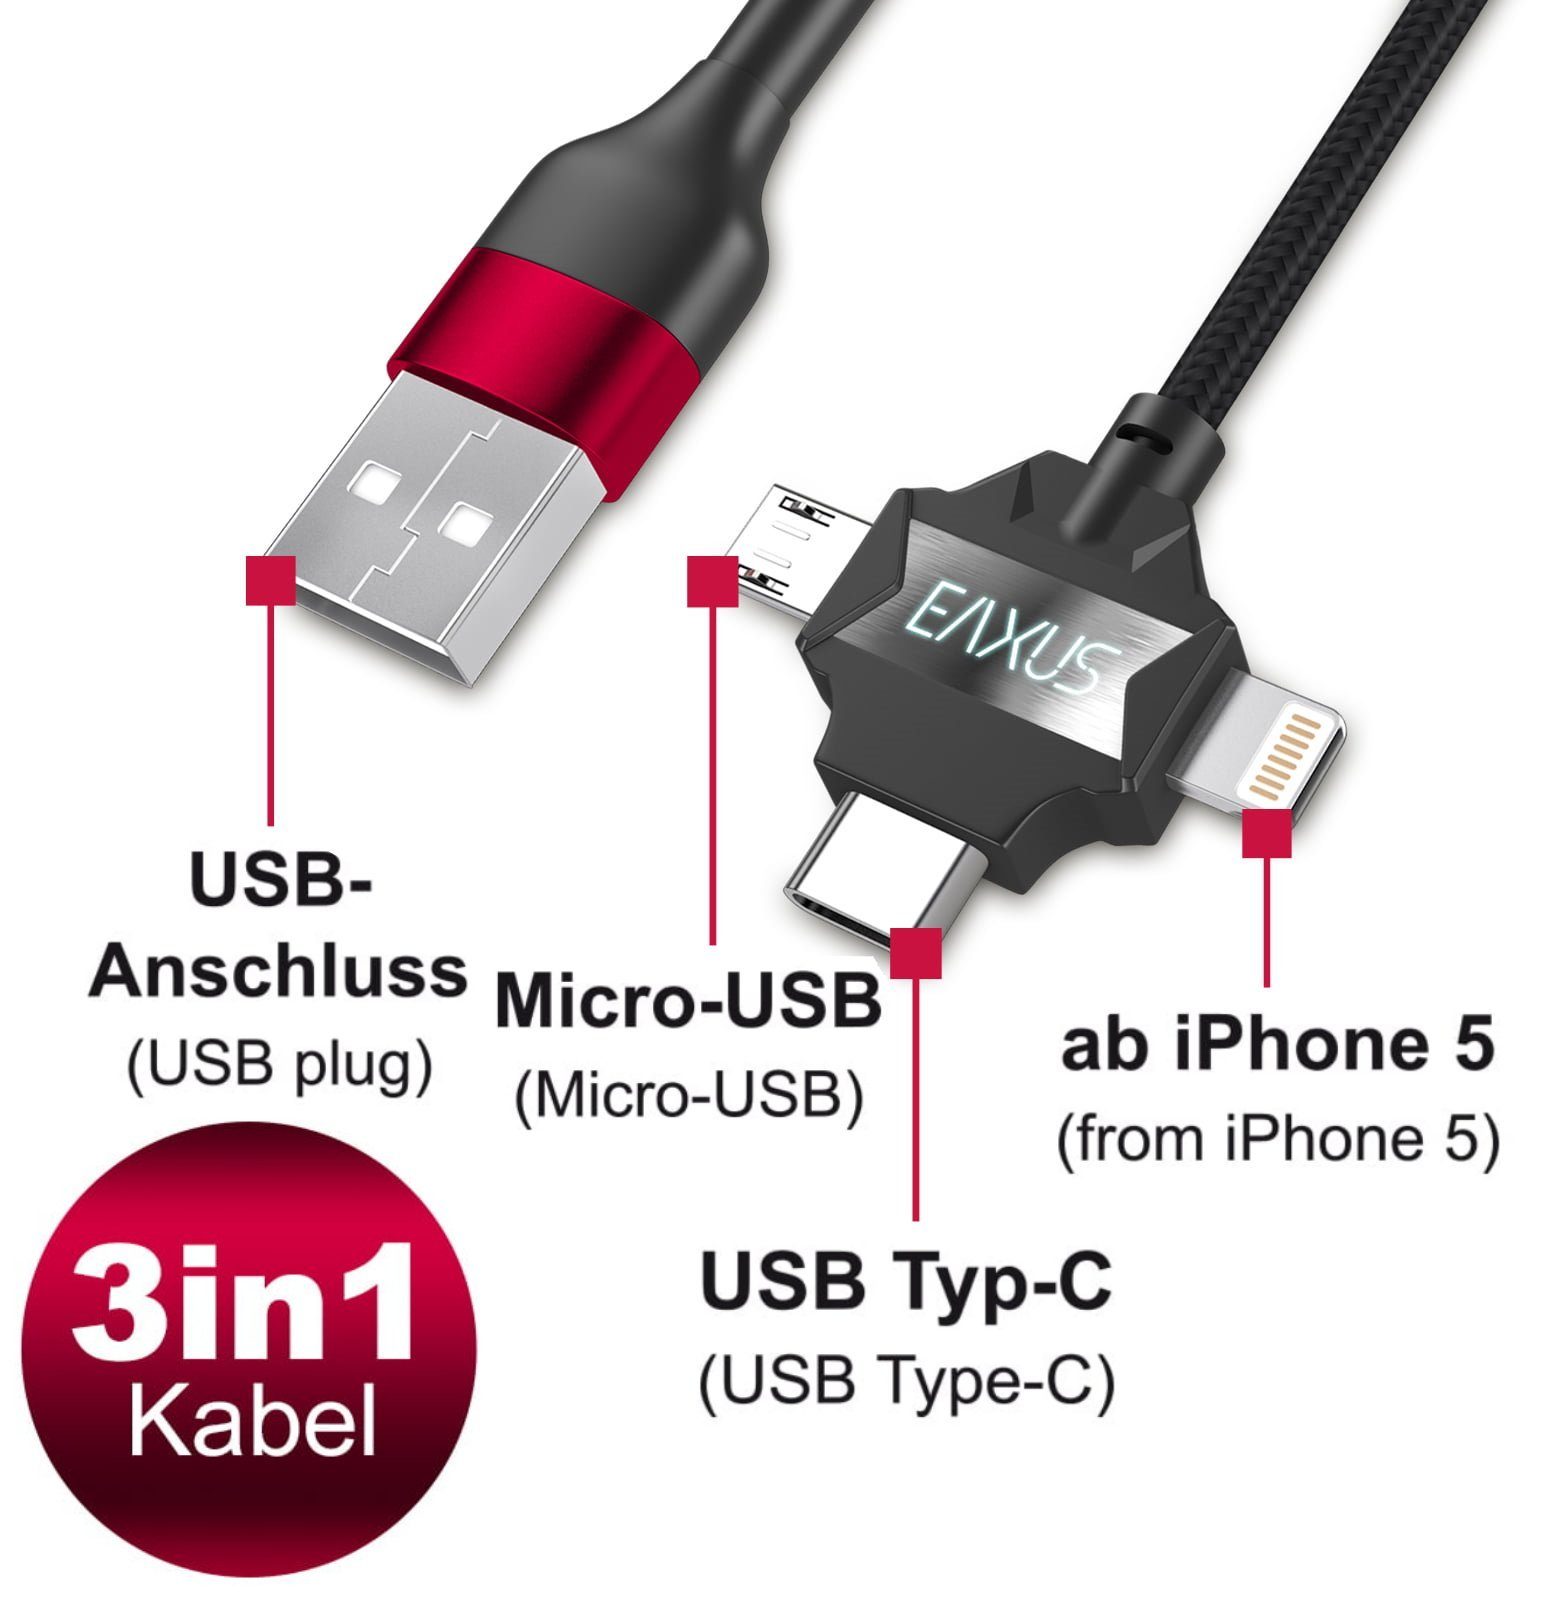 EAXUS Anti-Bruch 3in1 USB-Kabel Nylon mit LED-Statusleuchte USB-Kabel, USB  Typ C, microUSB, 8 Pin, (100 cm), Universal, für iPhone, iPad, Smartphones,  Tablets & Co.